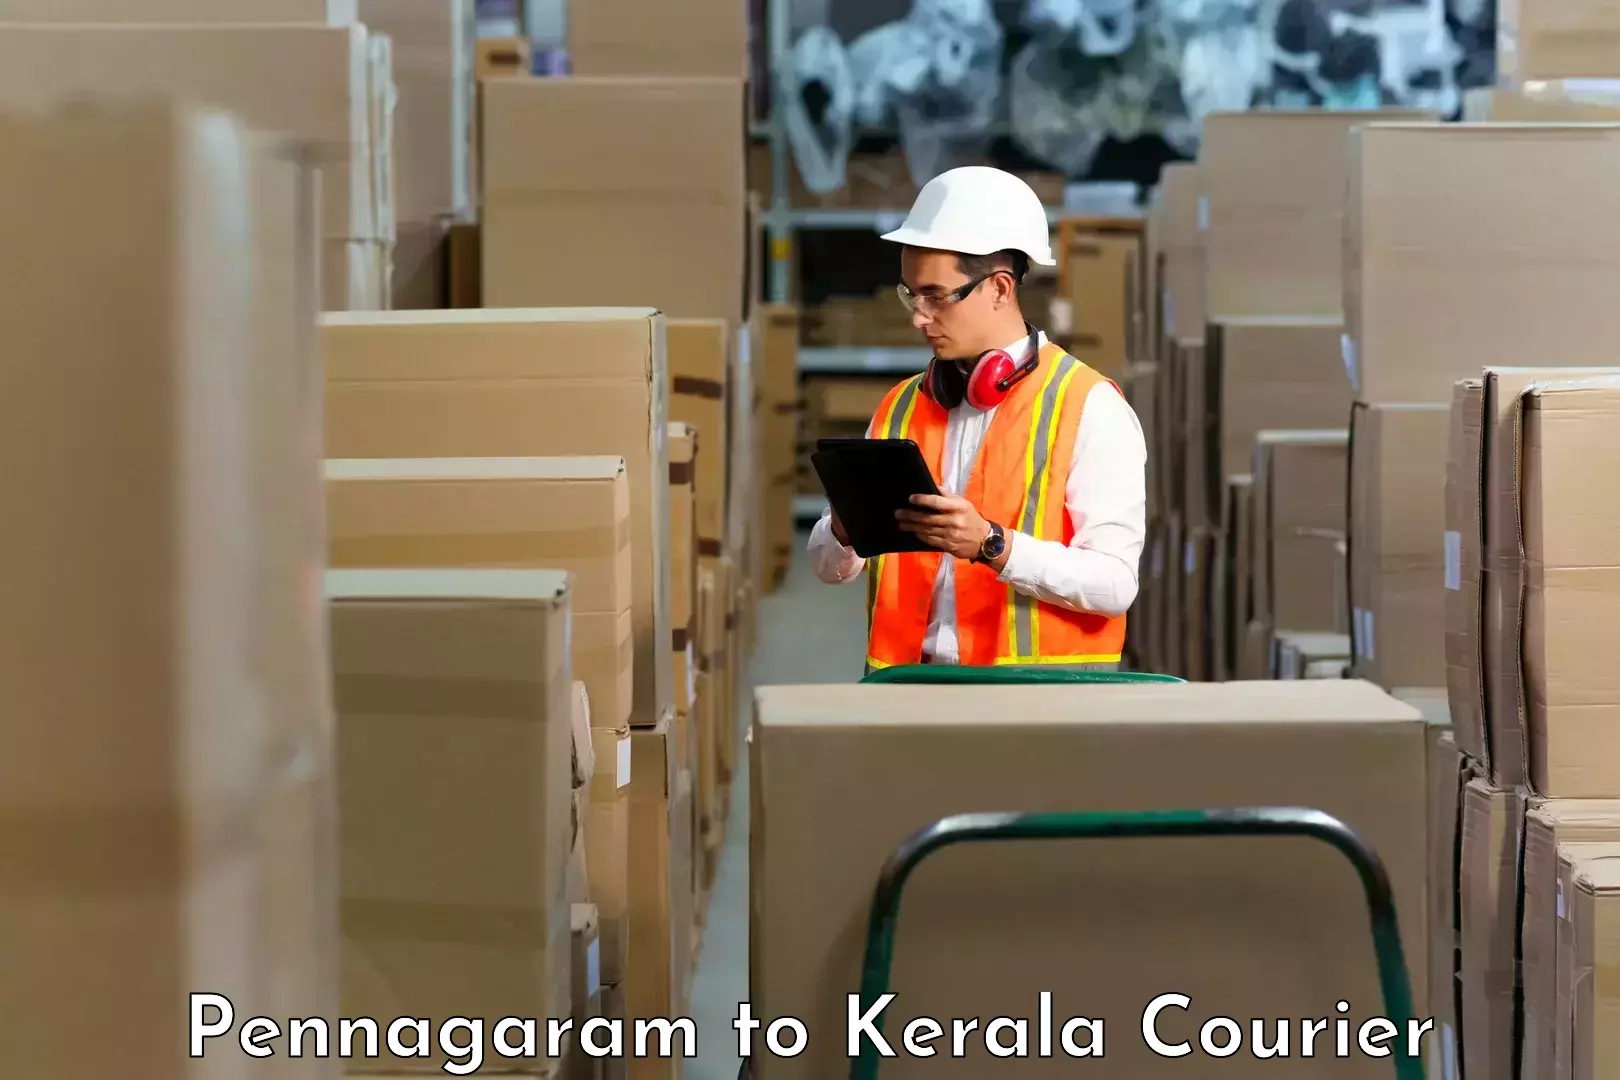 Rural area delivery in Pennagaram to Kerala